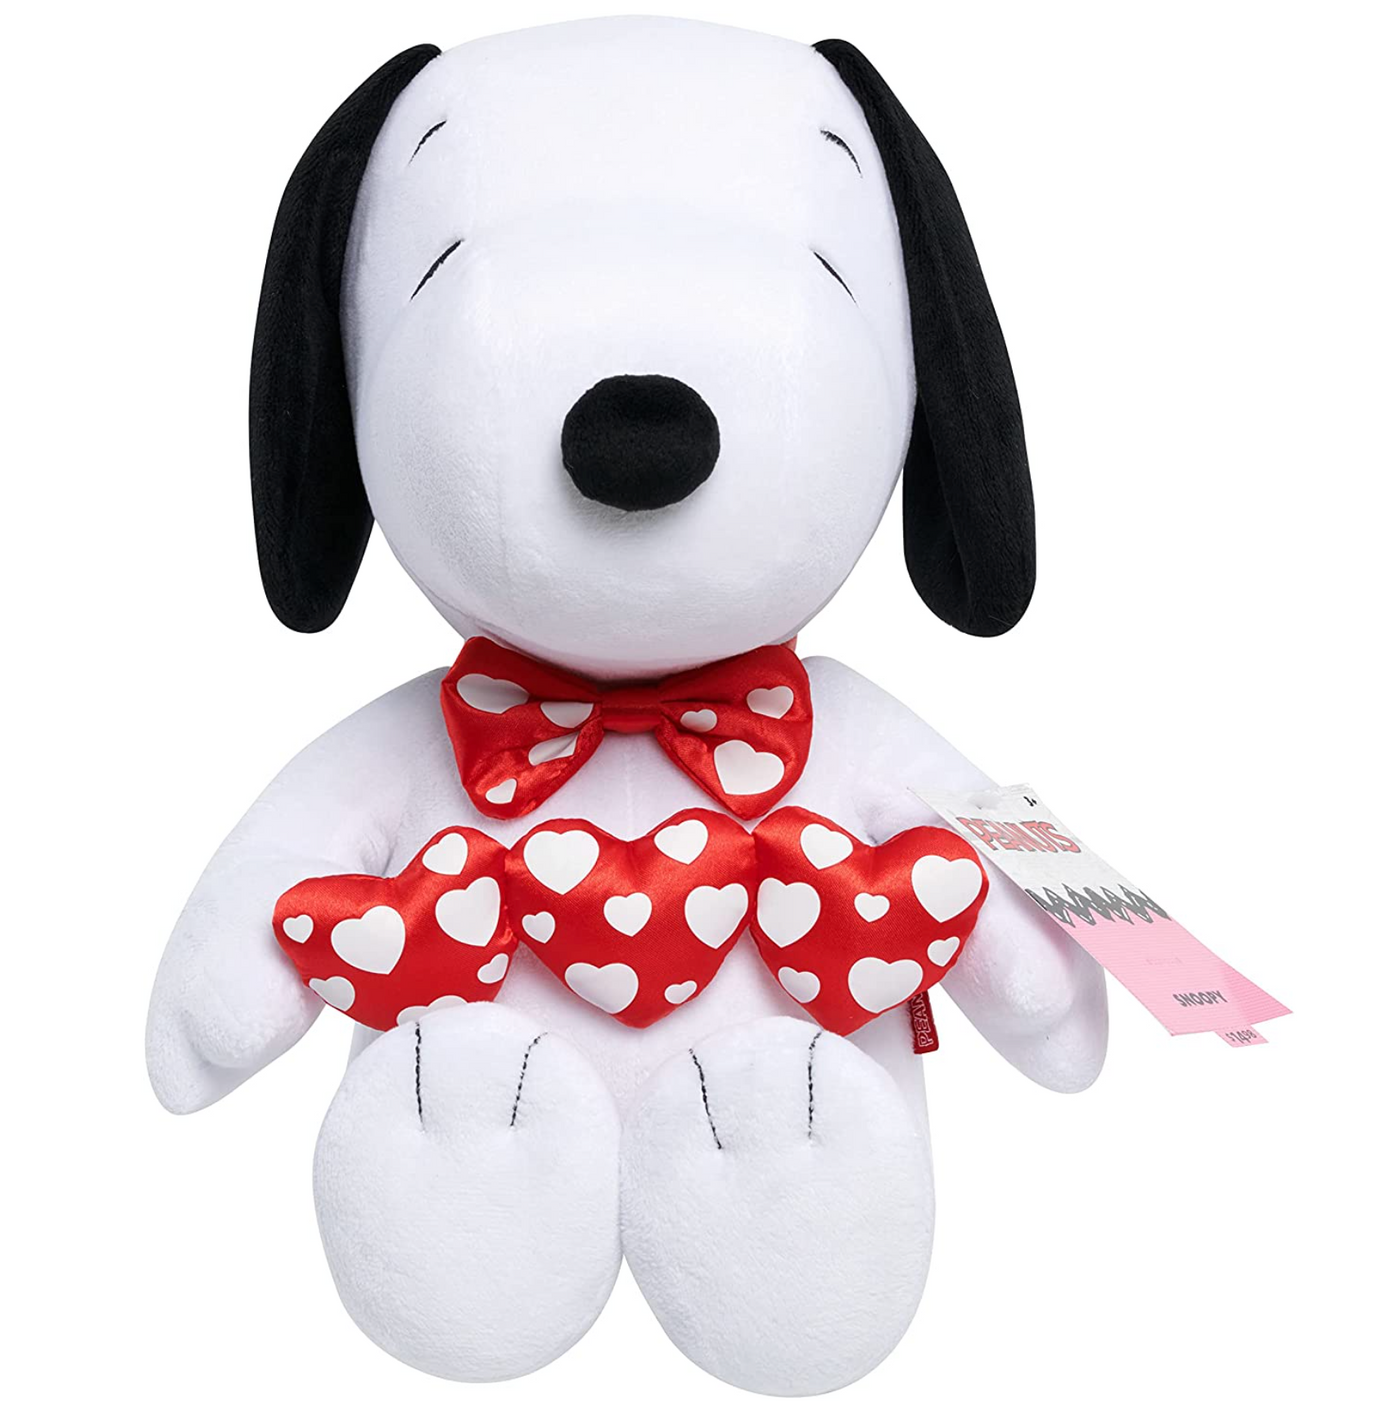 Peanuts Snoopy Valentine with Hearts Plush New with Tag